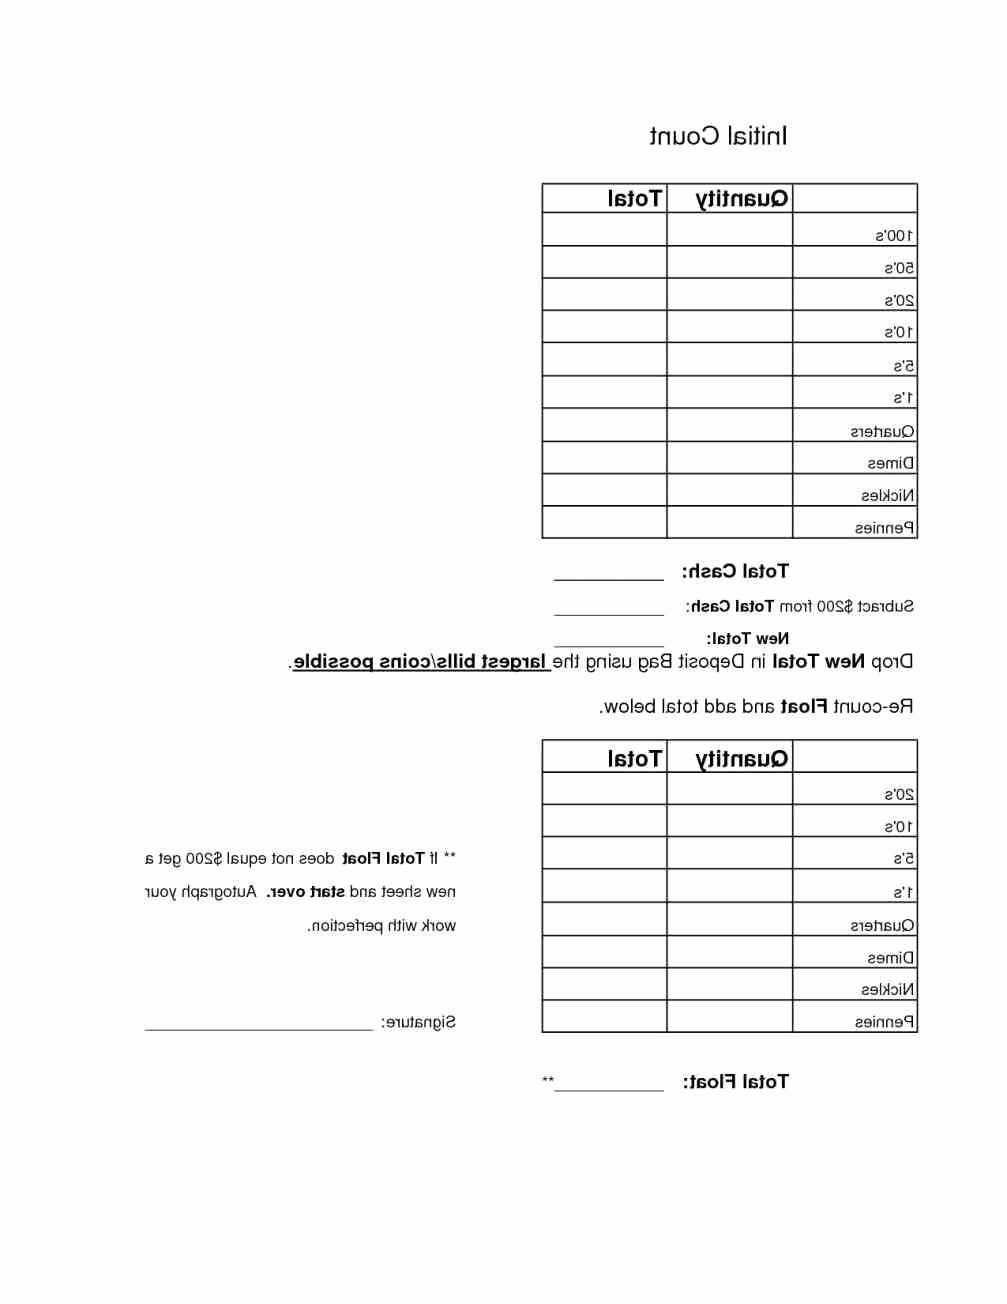 Daily Cash Drawer Balance Sheet Template Looking for